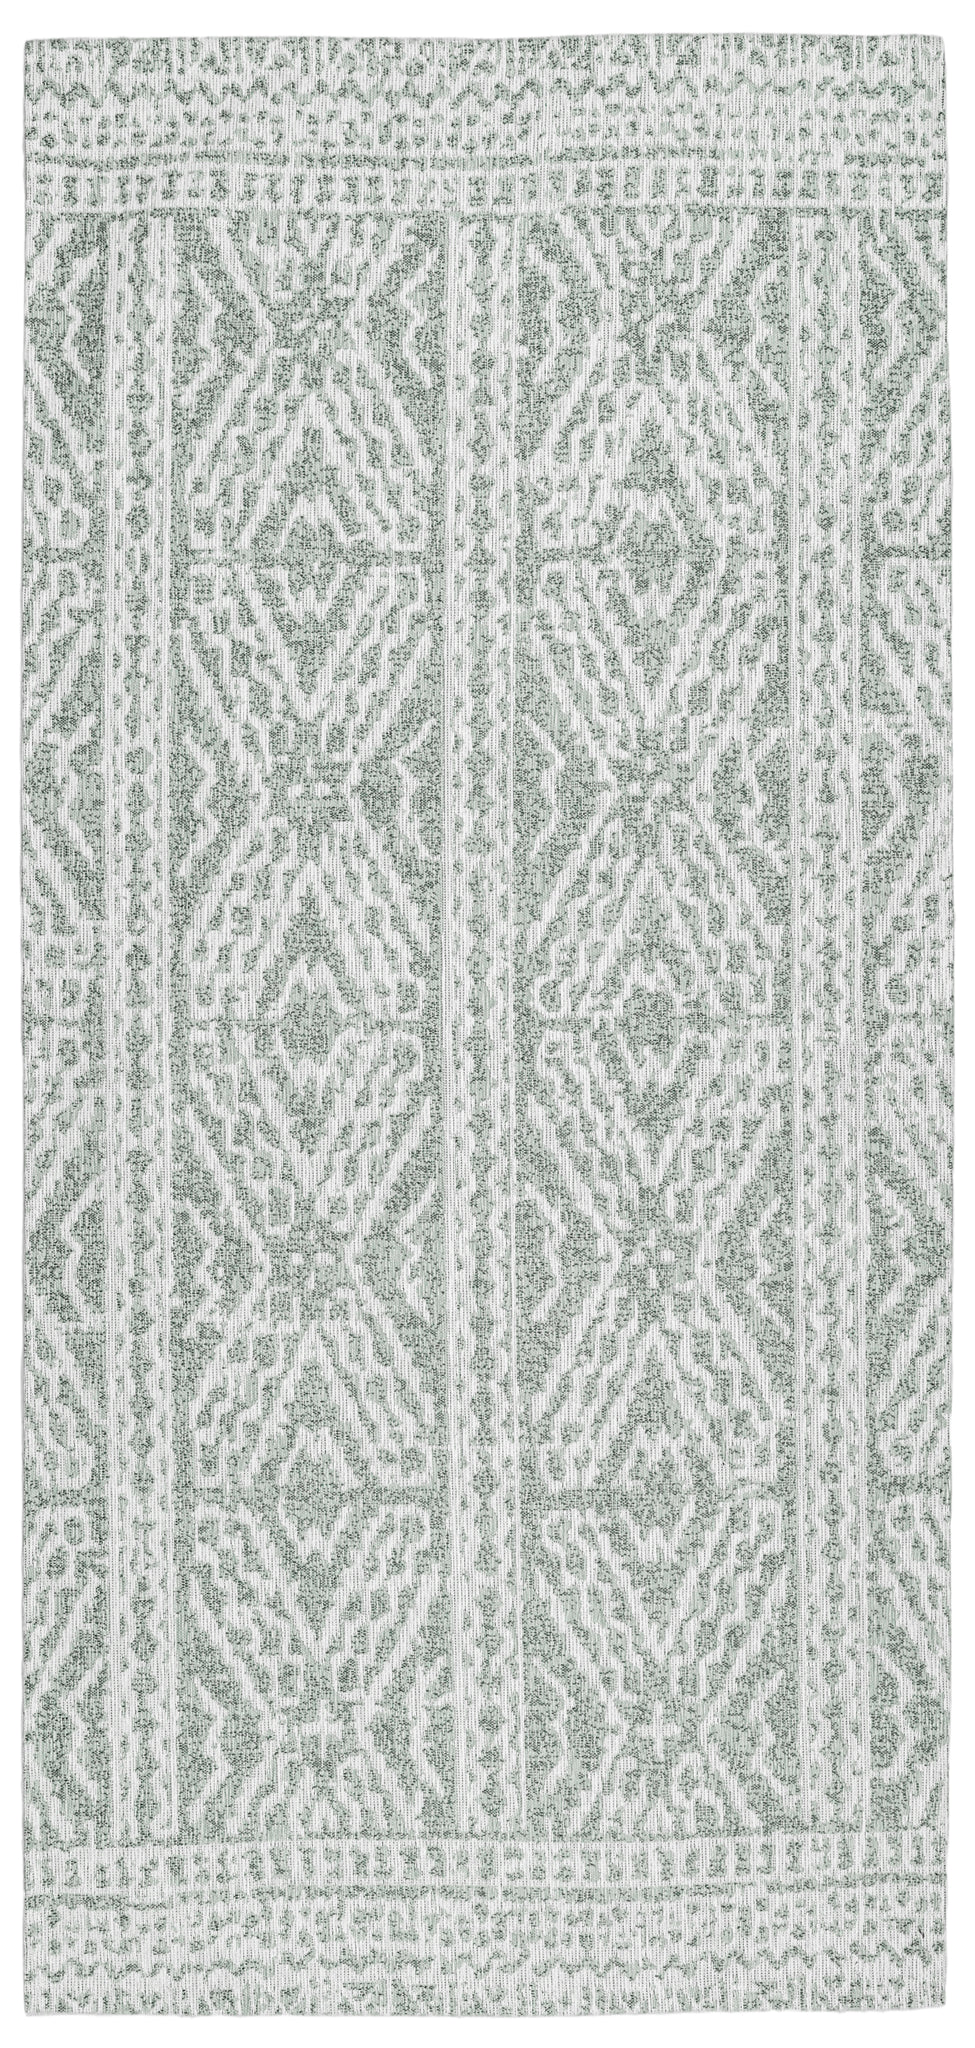 Washable Area rug | The Rugger Lillian | Mint & White | 3x7 | By MotherRuggers.com | Machine Washable | Jacquard Woven | Pet Friendly | Kid Friendly | Machine Wash | Line Dry | Living Room | Kitchen | Bedroom | High-Traffic | Anti-Slip | Three-year warranty with proper care | Shake or light Vacuum | Machine Wash as needed | Dry Flat or Line Dry | Dries fast